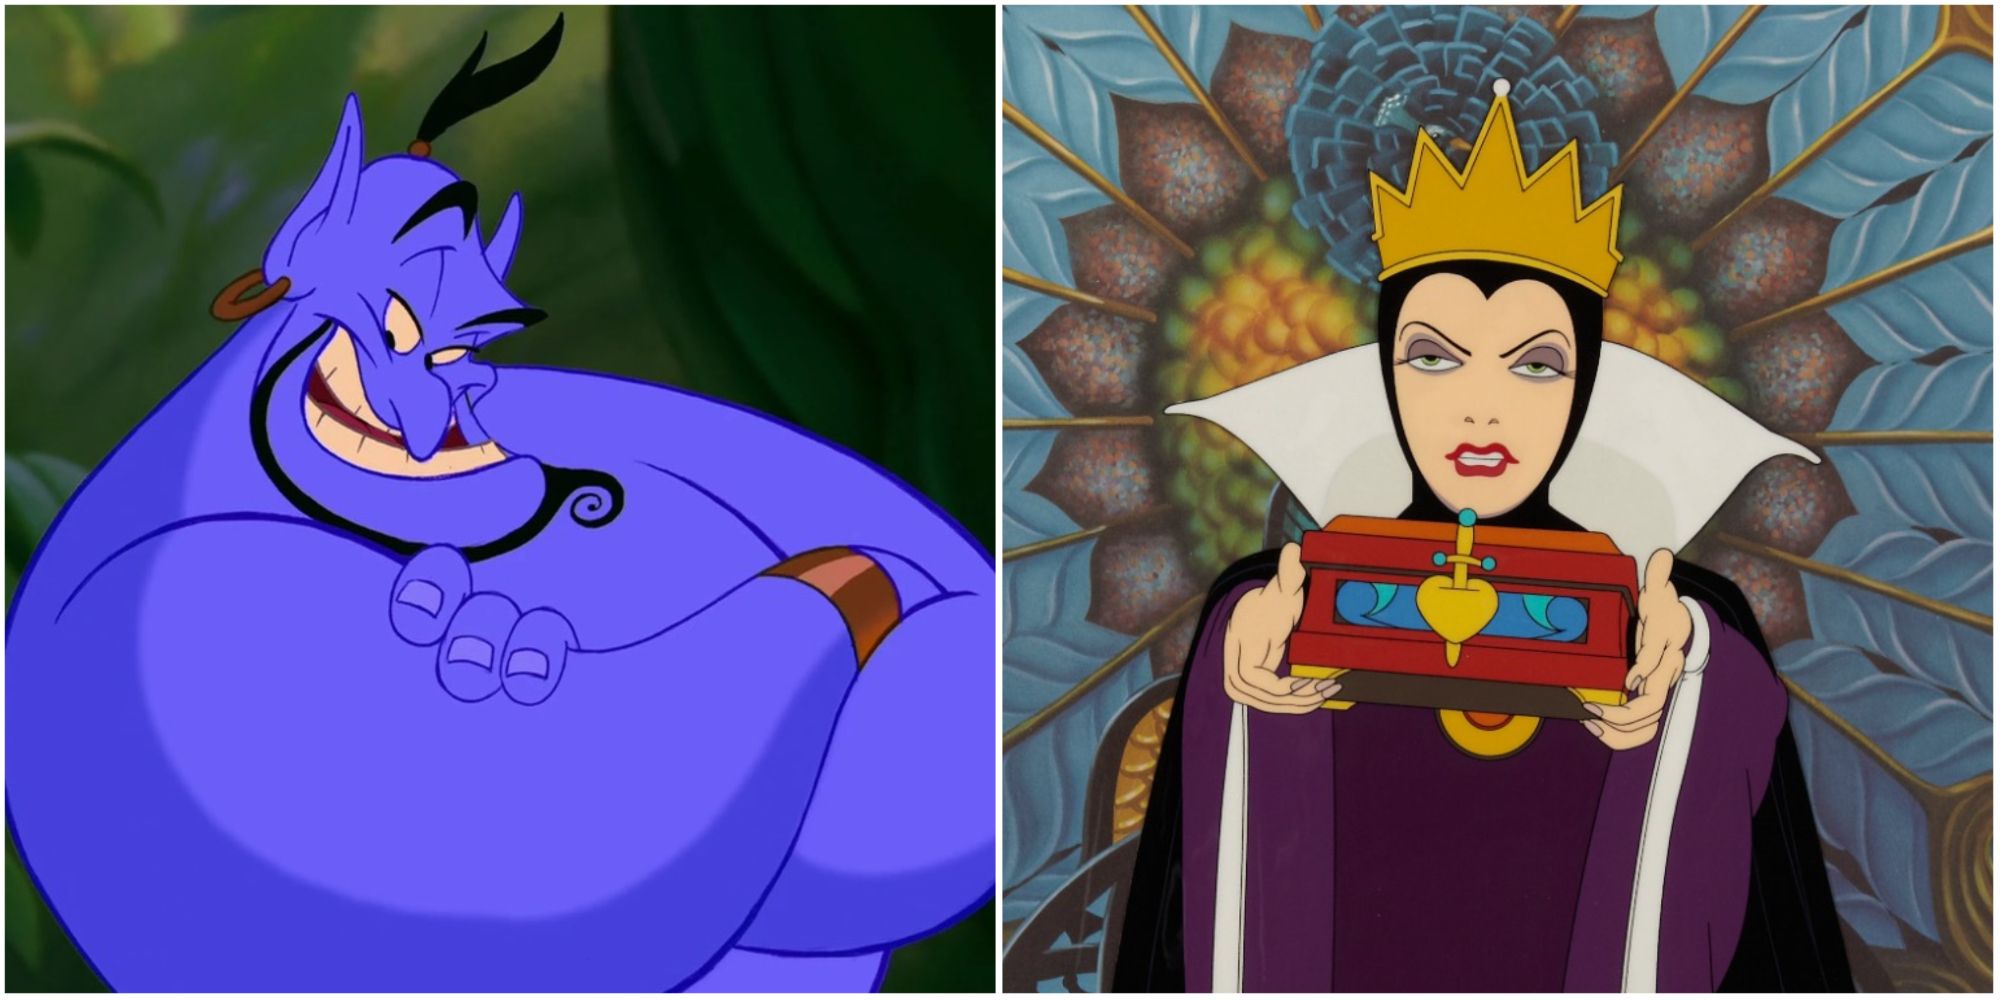 Genie in Aladdin and The Evil Queen in Snow White & the Seven Dwarves